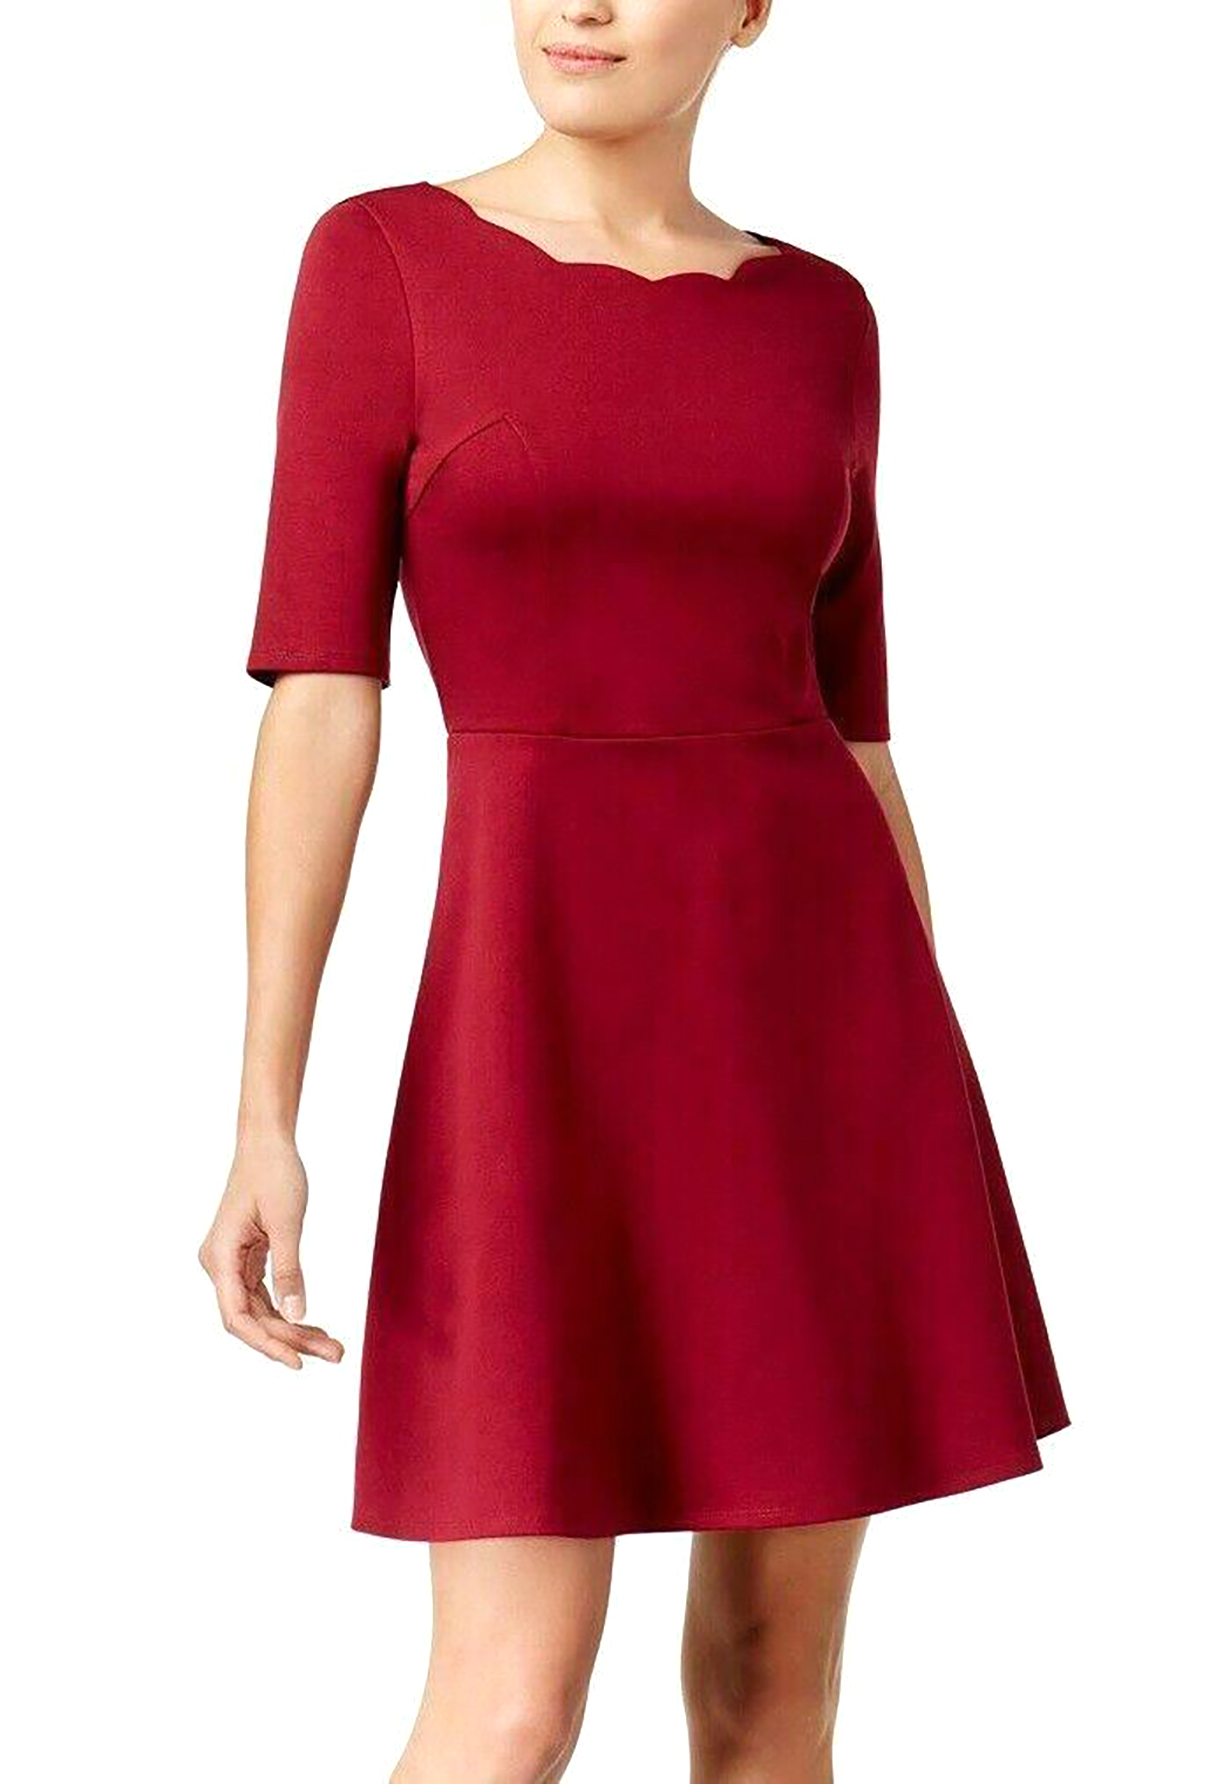 Monteau Los Angeles | Scalloped-Neck Fit & Flare Dress | Red | M Petite ...